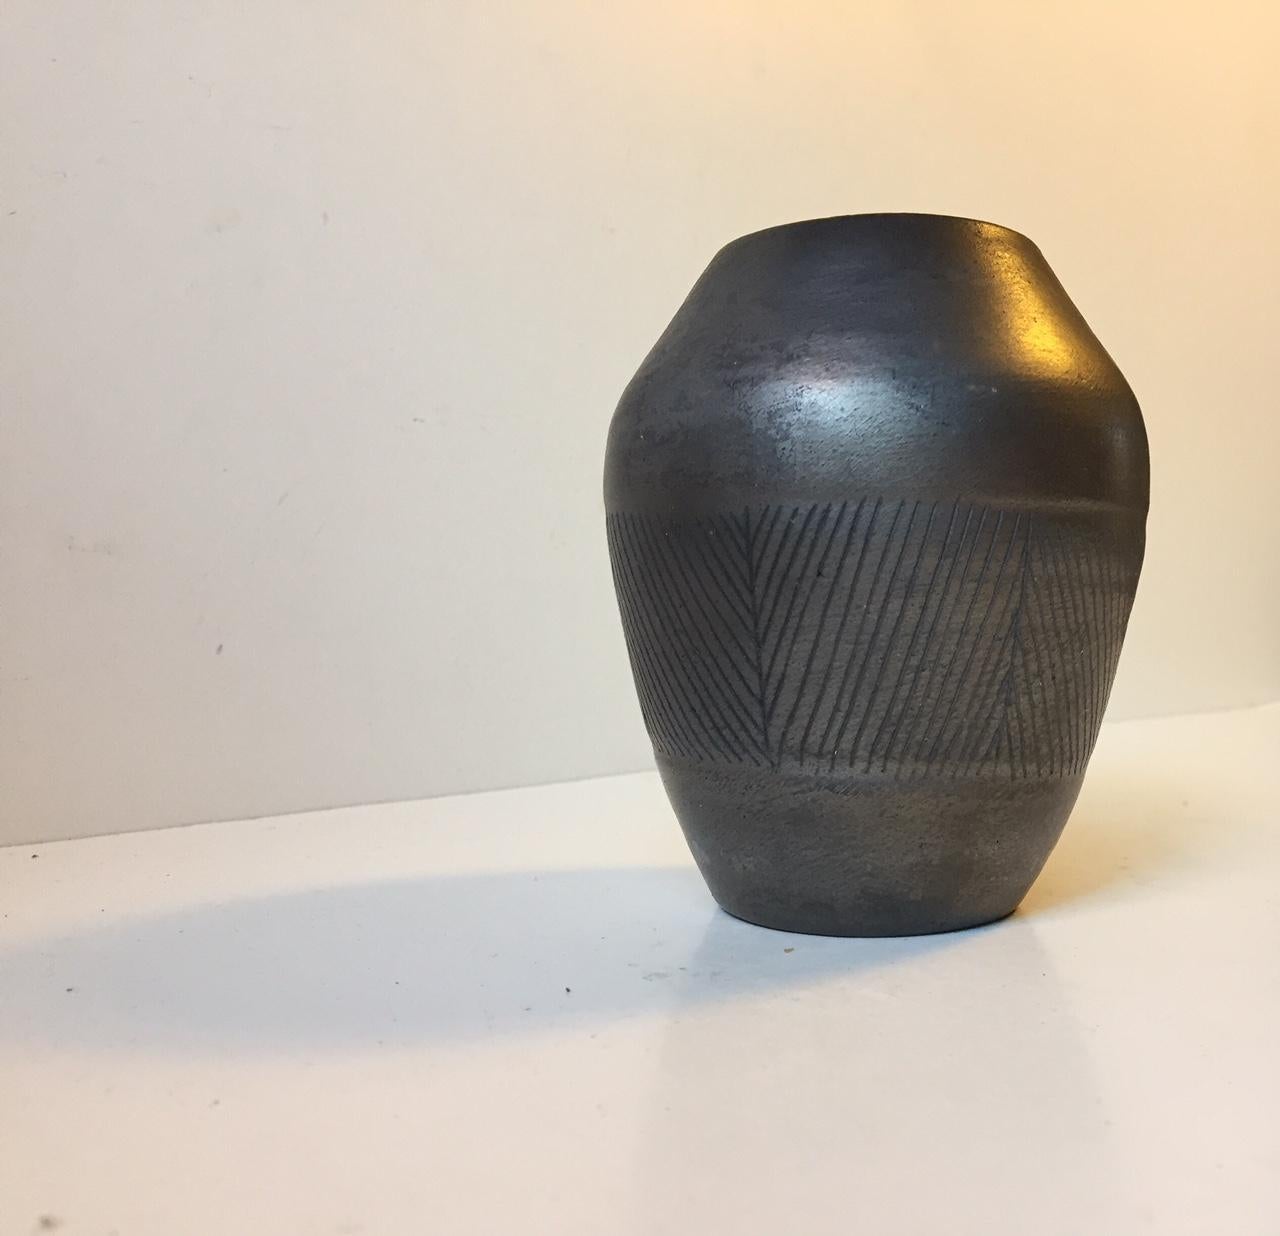 Slate black Scandinavian vase with diagonal incisions, pin-stripes. Designed by an anonymous ceramist in Scandinavia during the 1950s or 1960s. It was possibly created at either Höganäs or Uppsala Ekeby both of which had ceramic pieces leave the